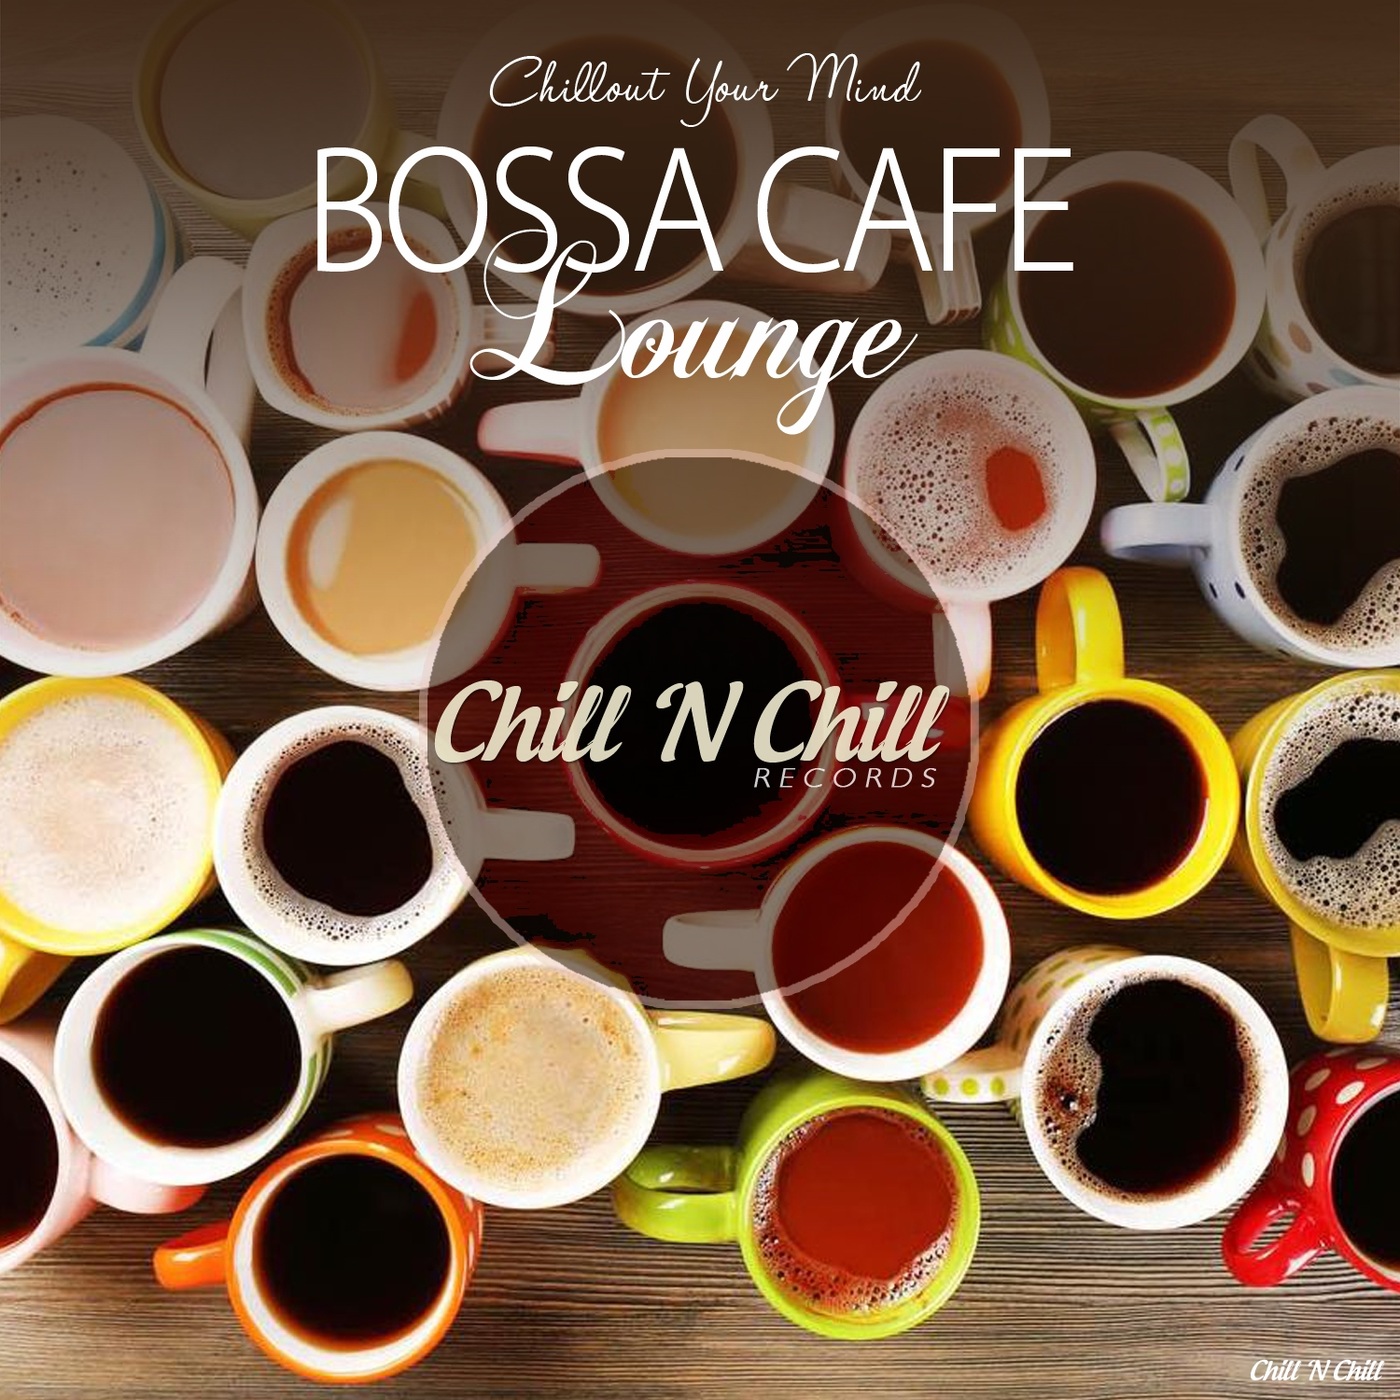 chill n chill records《bossa cafe lounge：chillout your mind》cd级